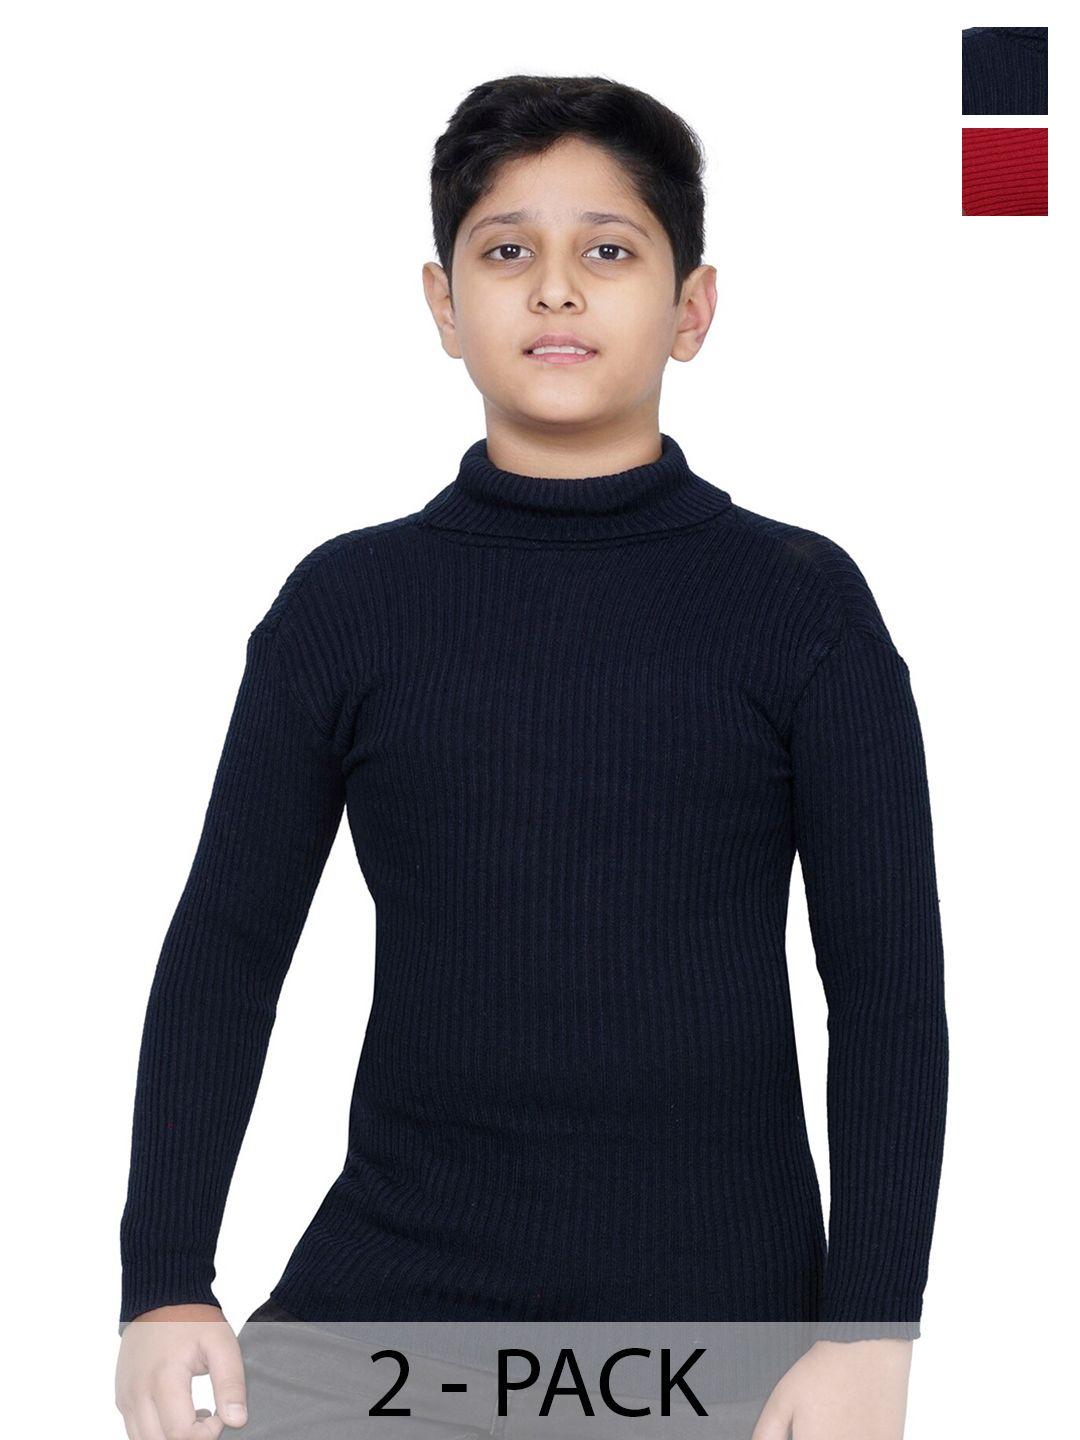 baesd boys woollen pullover with applique detail